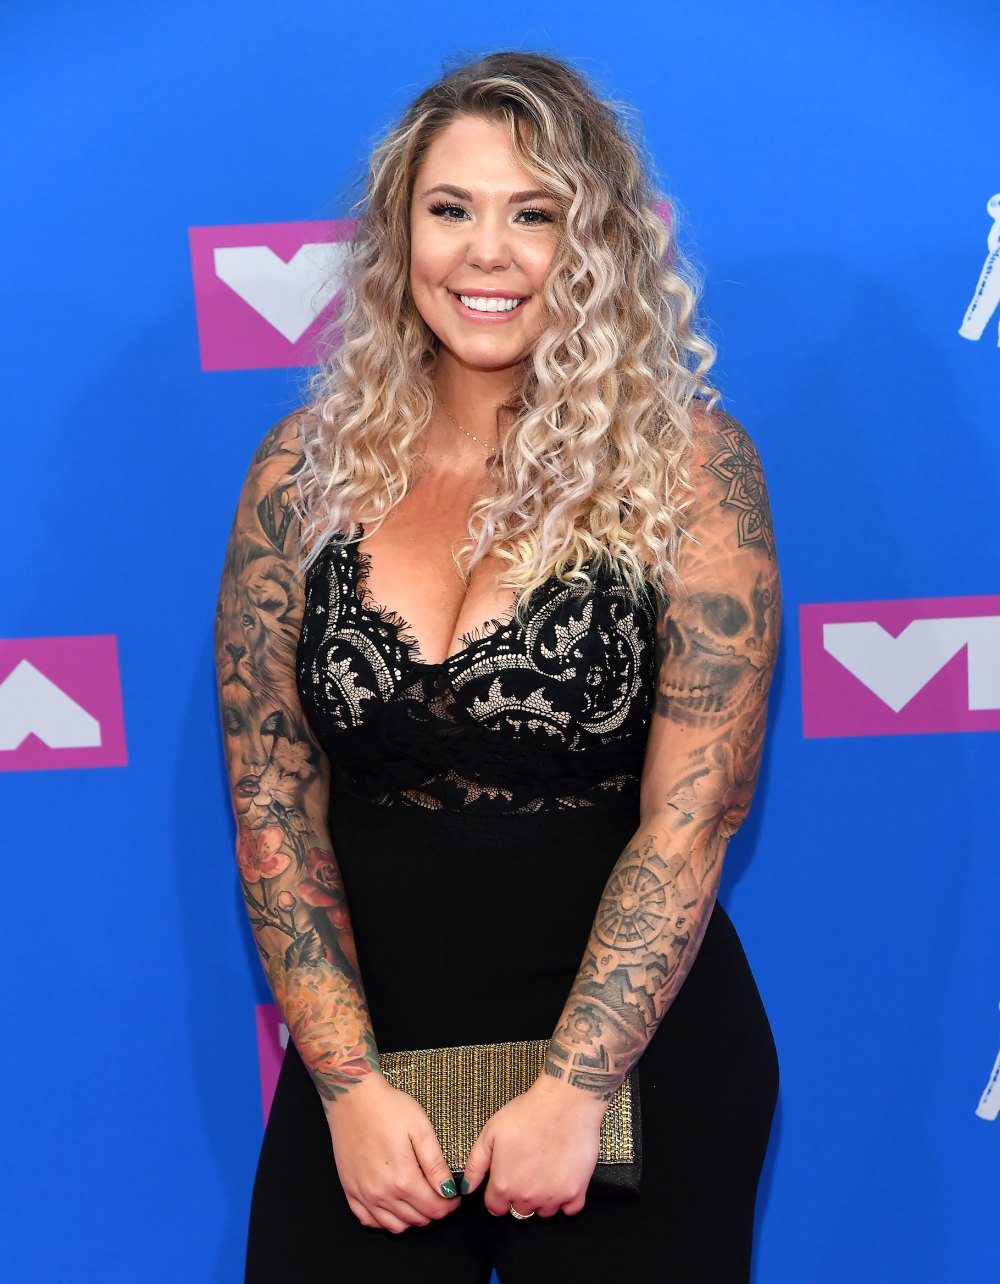 Teen Mom 2's Kailyn Lowry Shares 1st Photo of All 5 Sons Together While Expecting Twins